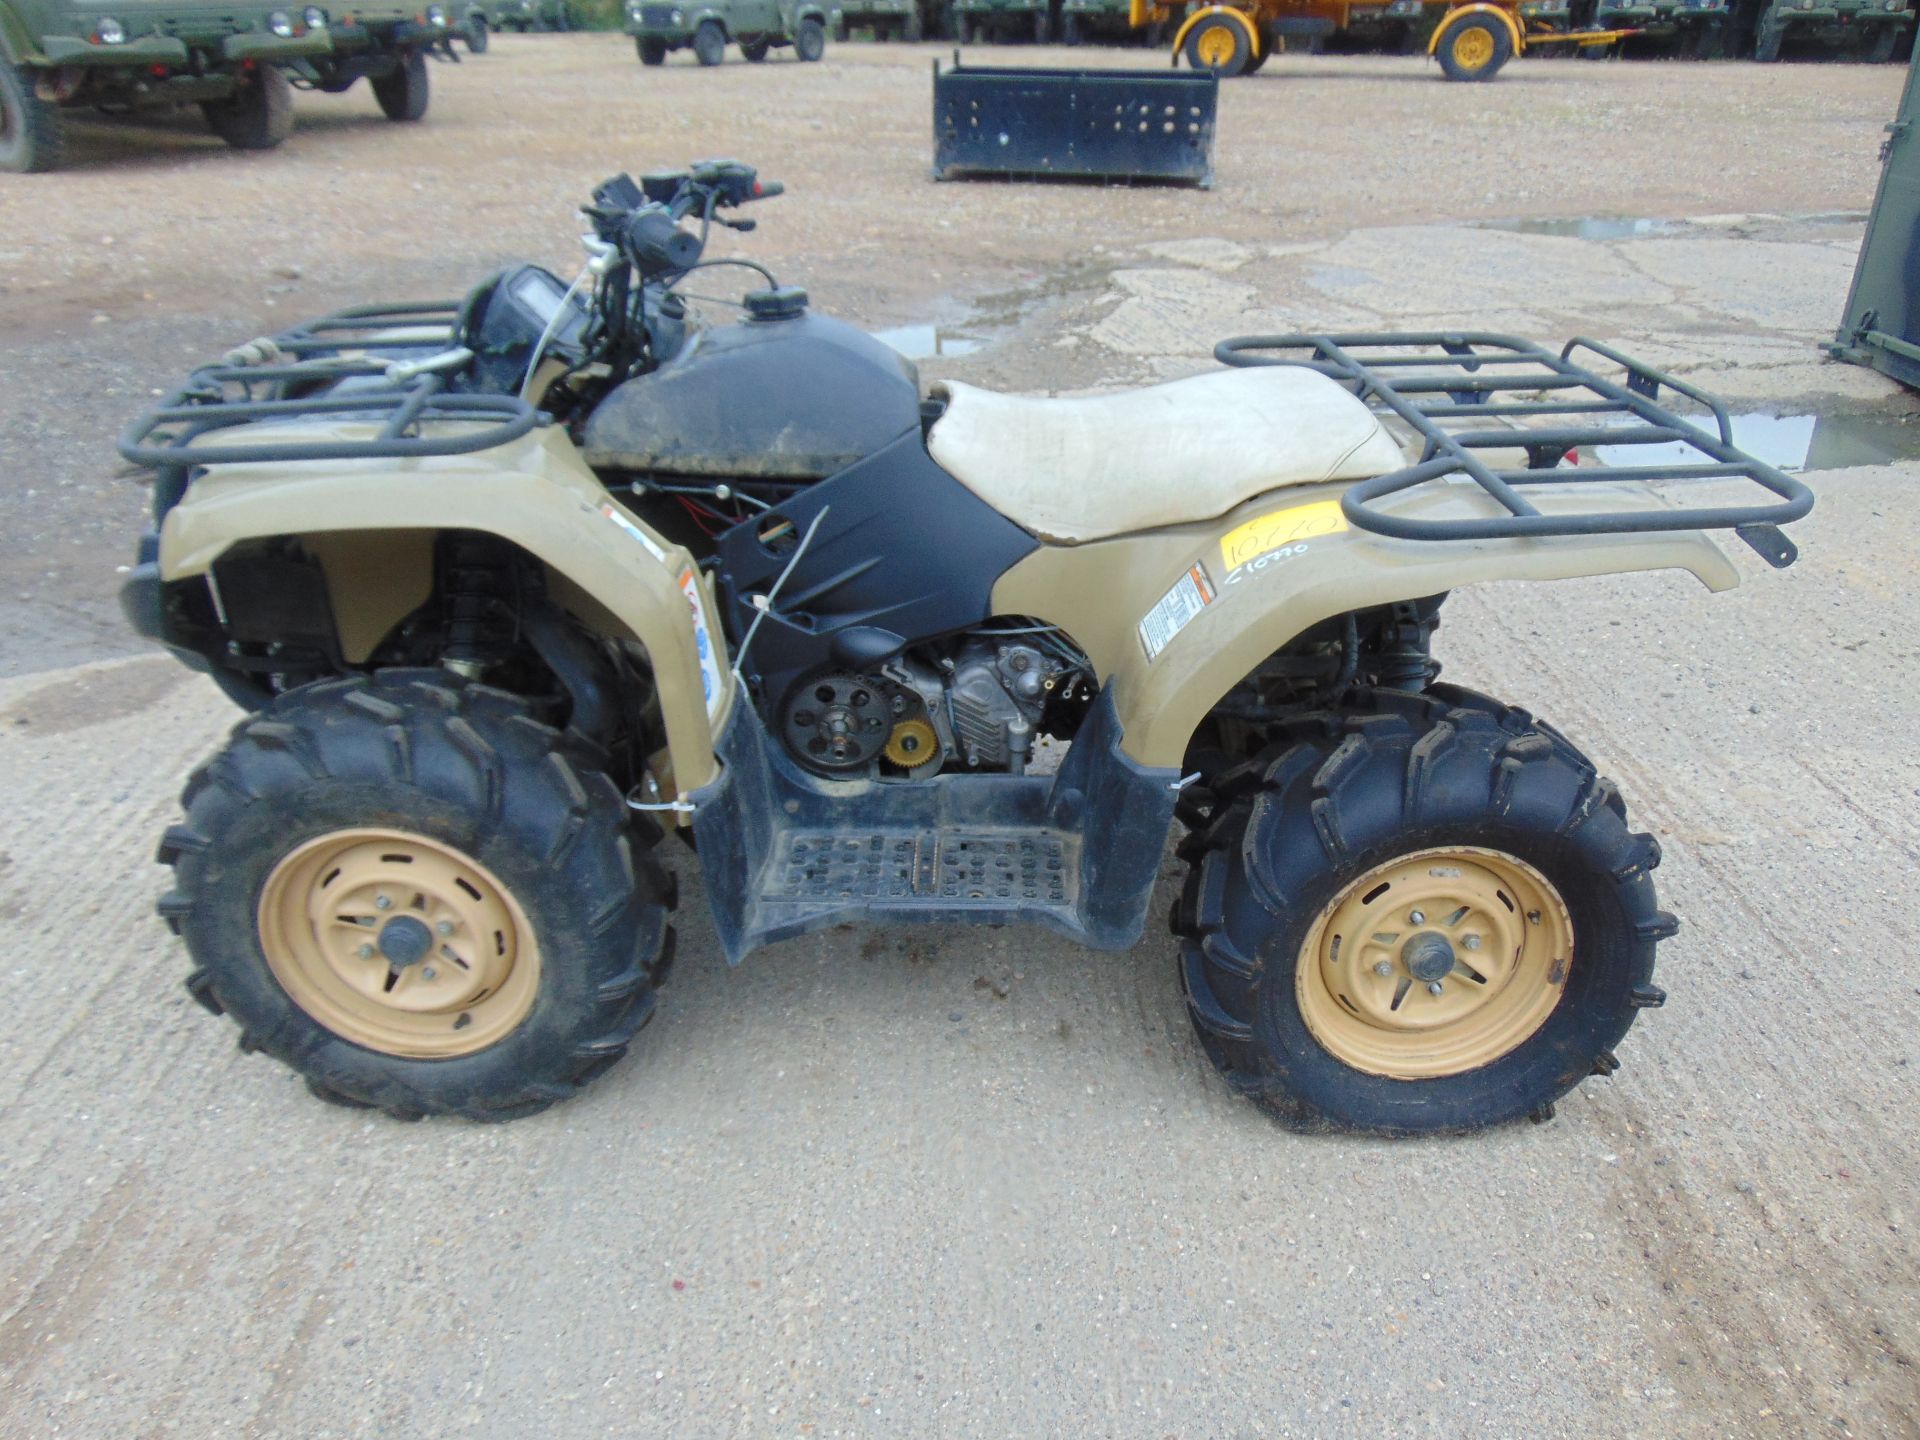 Military Specification Yamaha Grizzly 450 4 x 4 ATV Quad Bike - Image 3 of 16